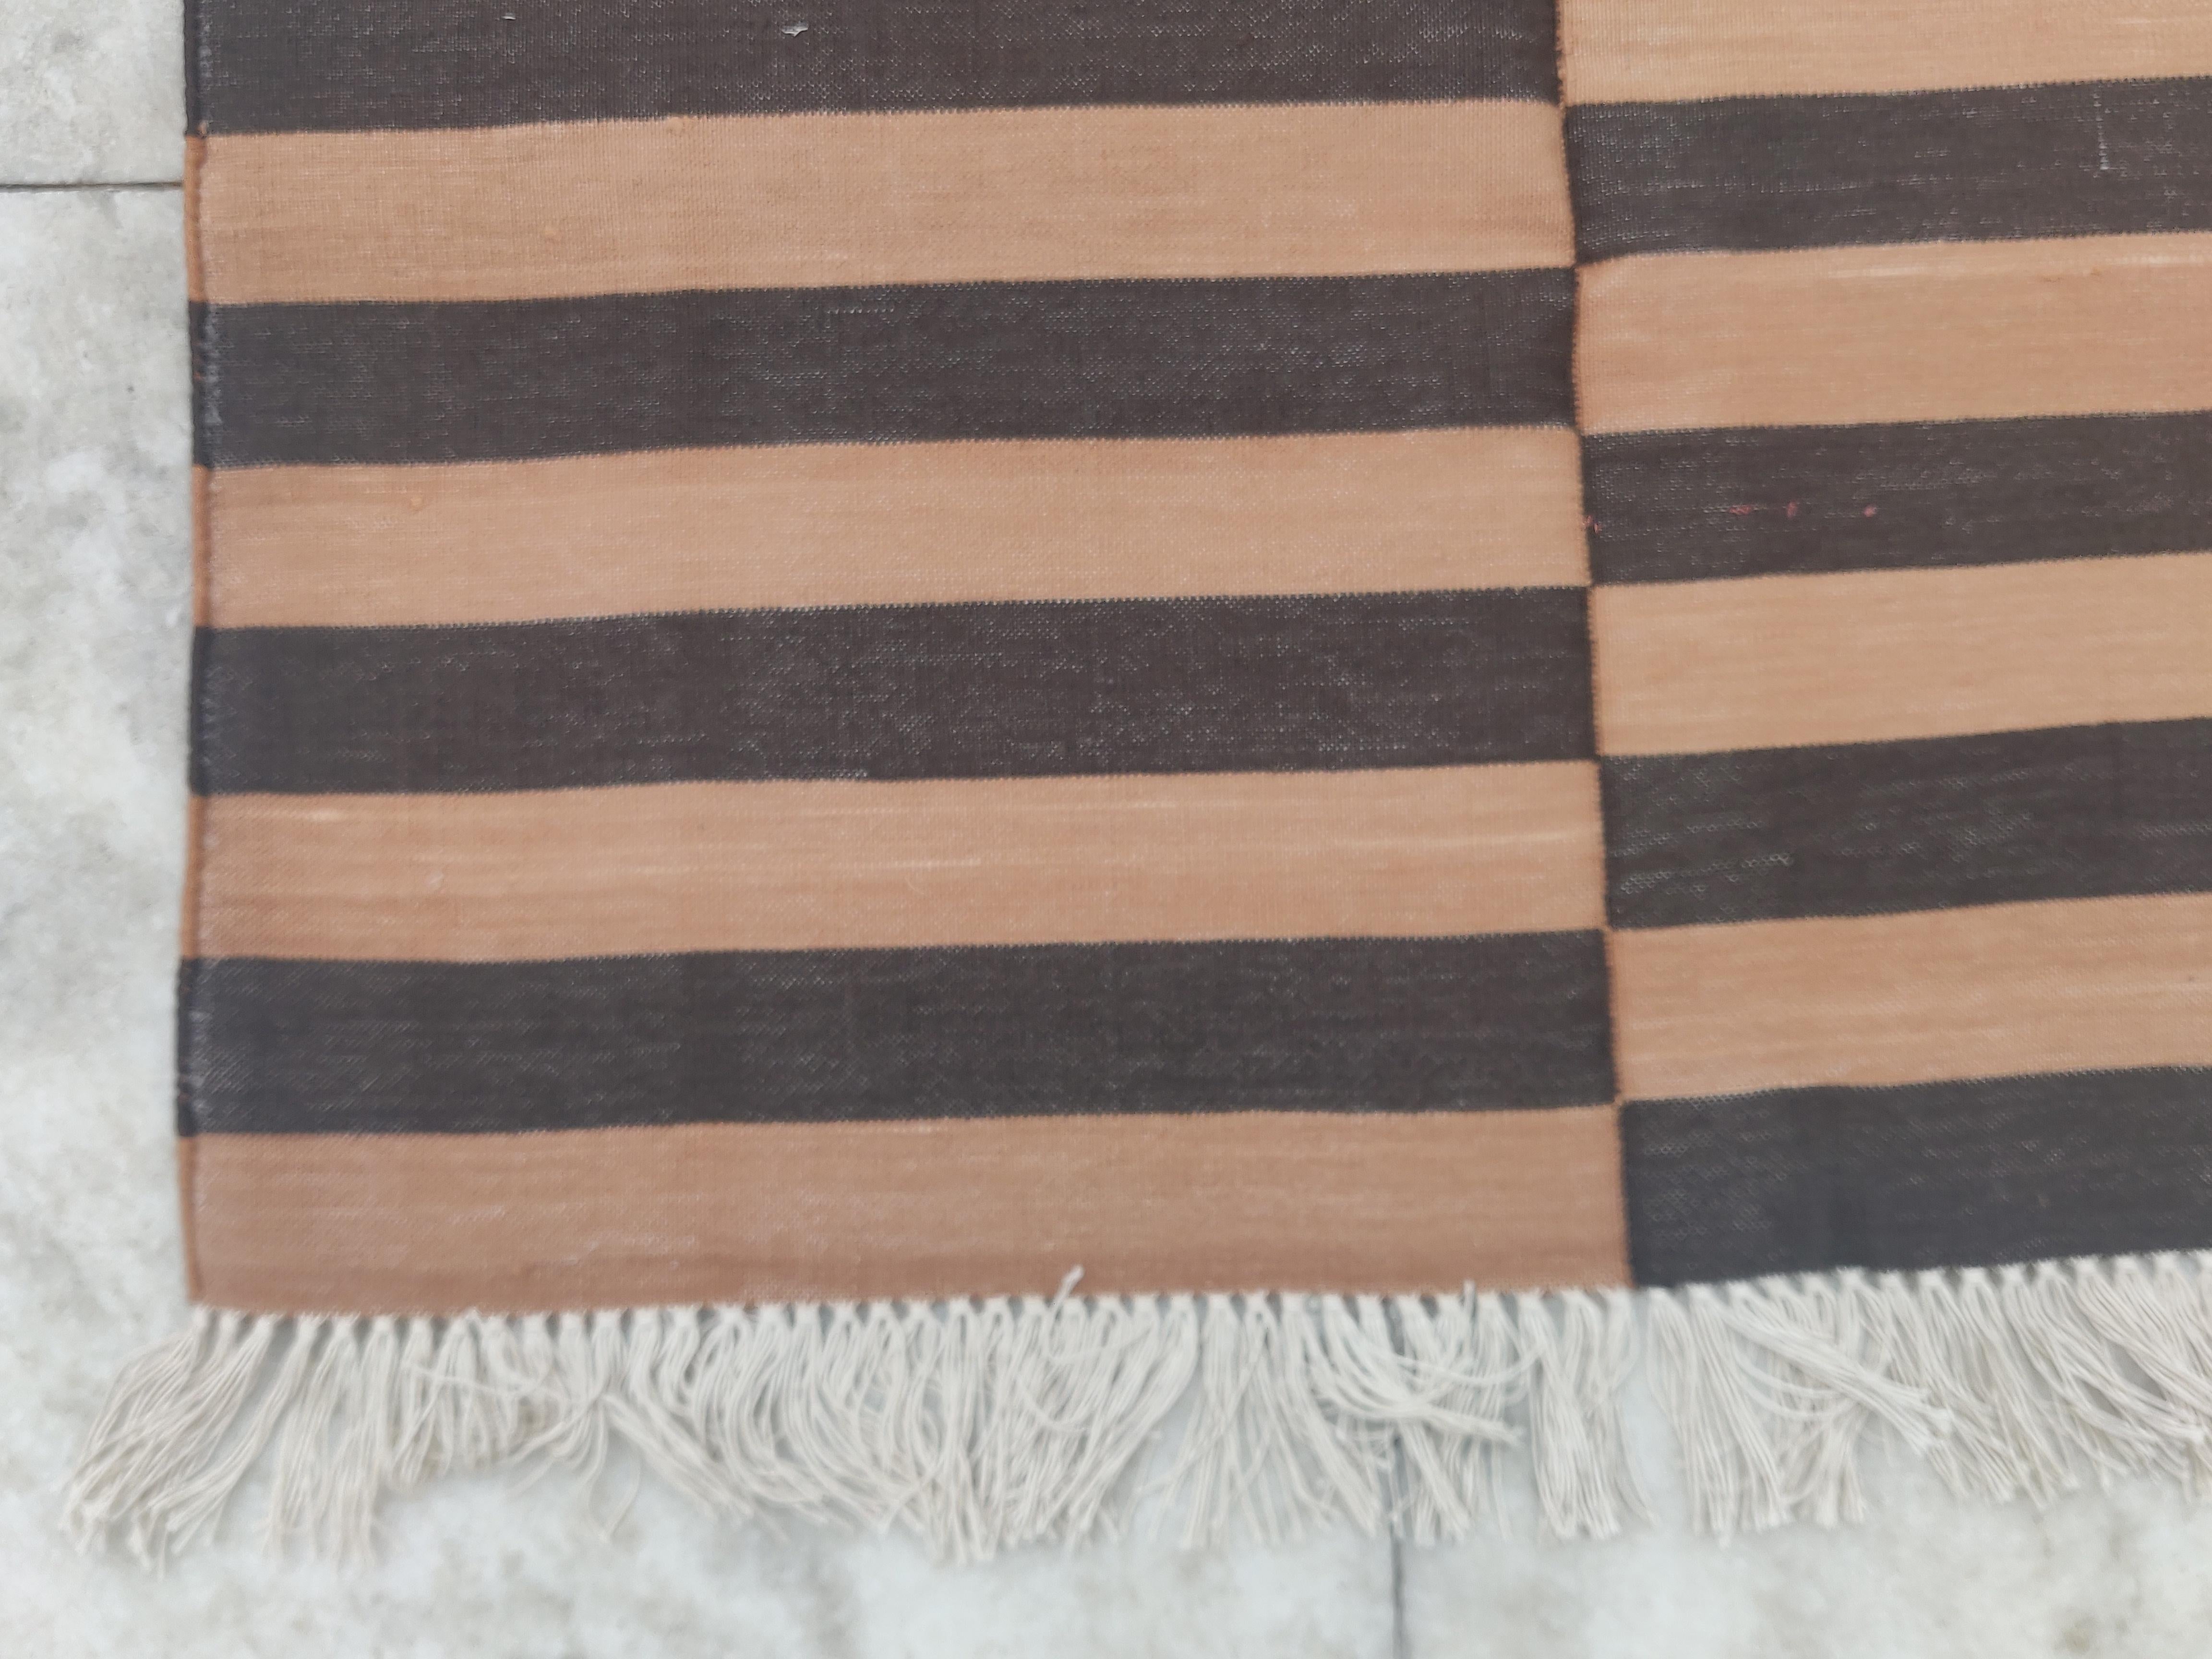 Handmade Cotton Area Flat Weave Rug, 2.5x4 Tan And Brown Striped Indian Dhurrie In New Condition For Sale In Jaipur, IN